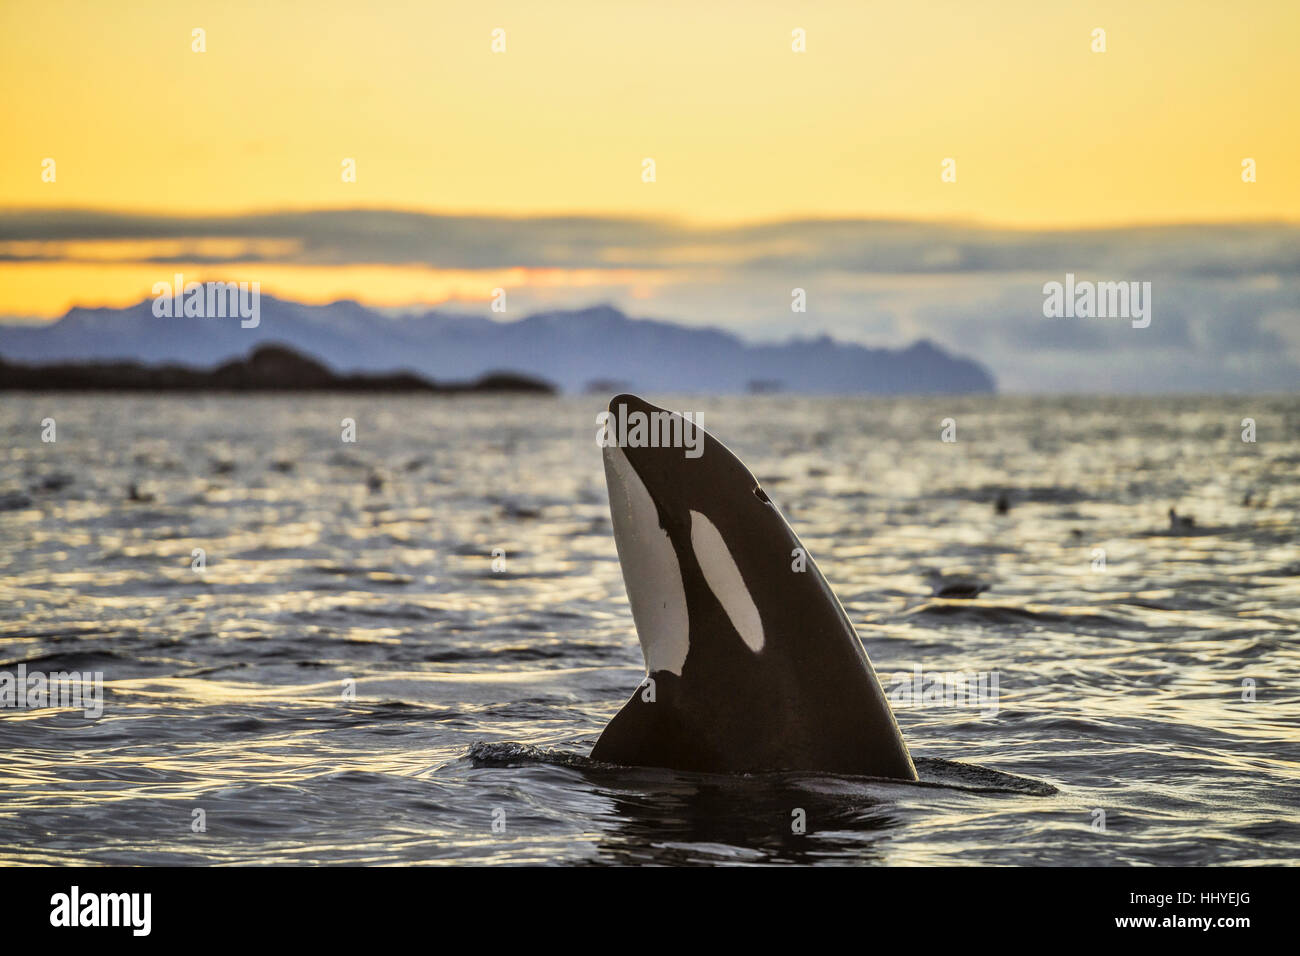 Orca (Orcinus orca) looking out of the water, Spyhopping, sunset, mountains at back, Kaldfjorden, Tromvik, Norway Stock Photo